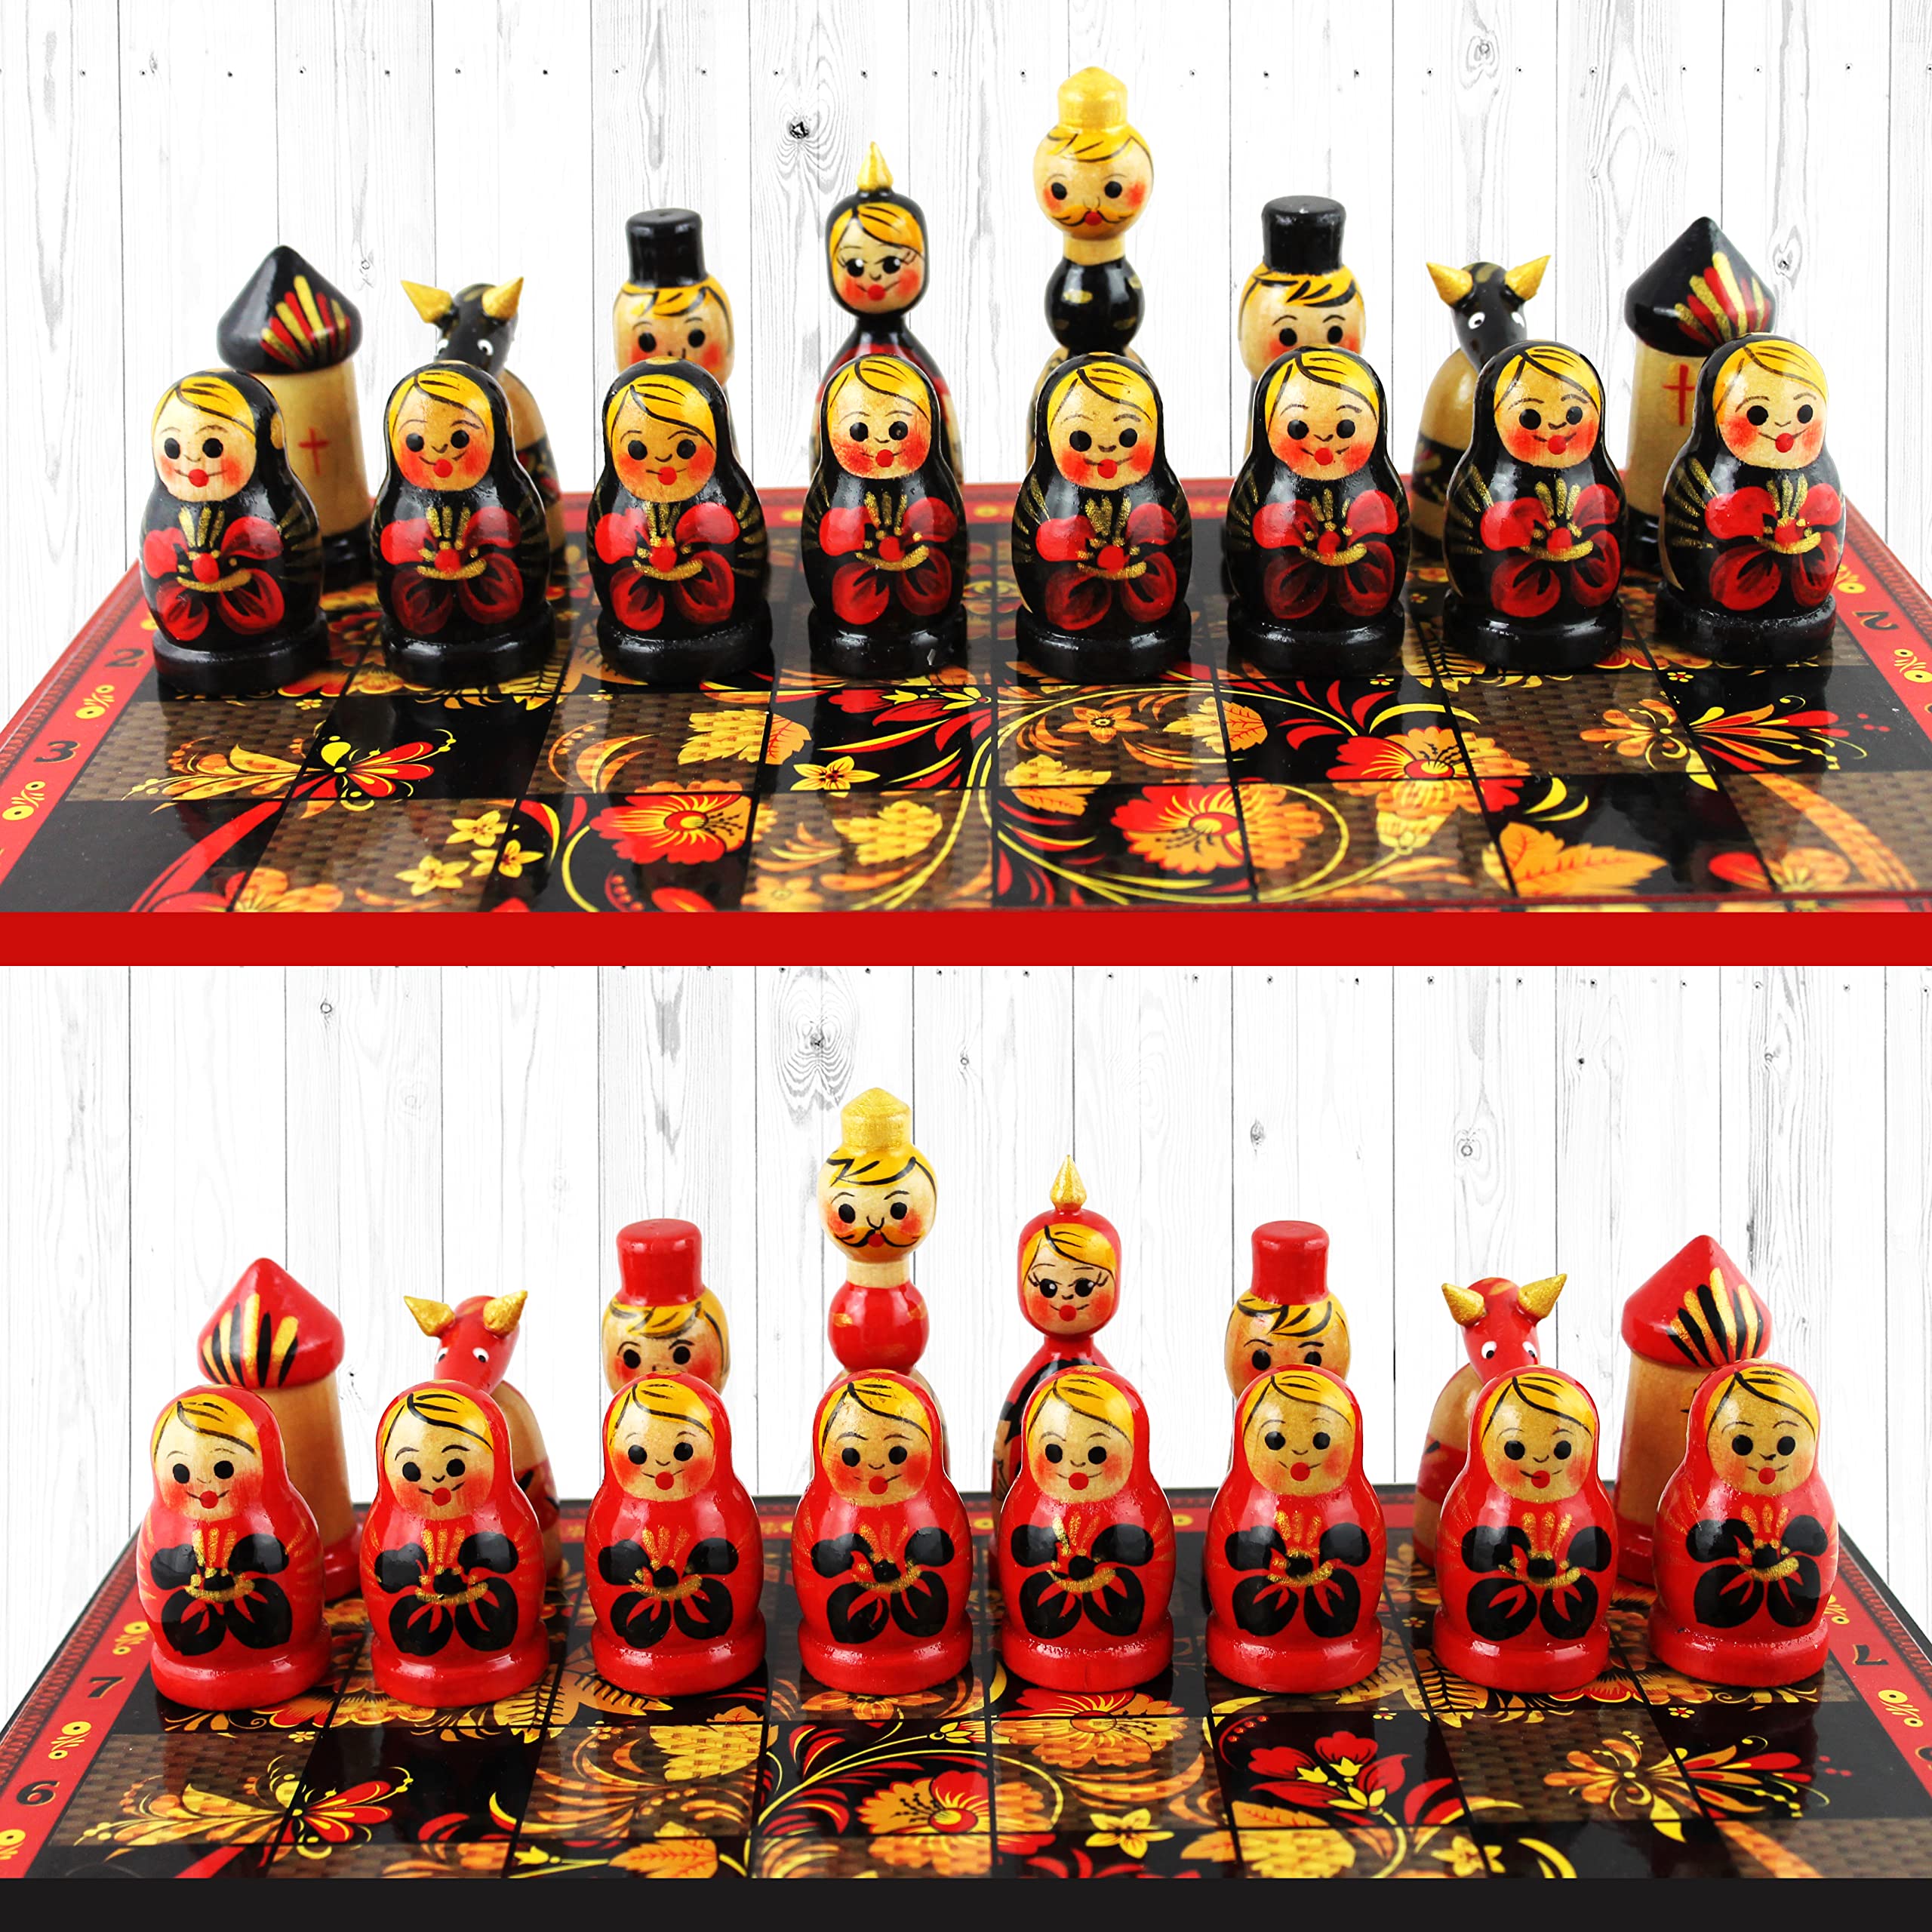 Souvenir Chess Set Russian Folk Art Khokhloma - Handcrafted Chess Pieces as Matryoshka Dolls - Unique Chess Sets - Family Board Games - Chess Gifts